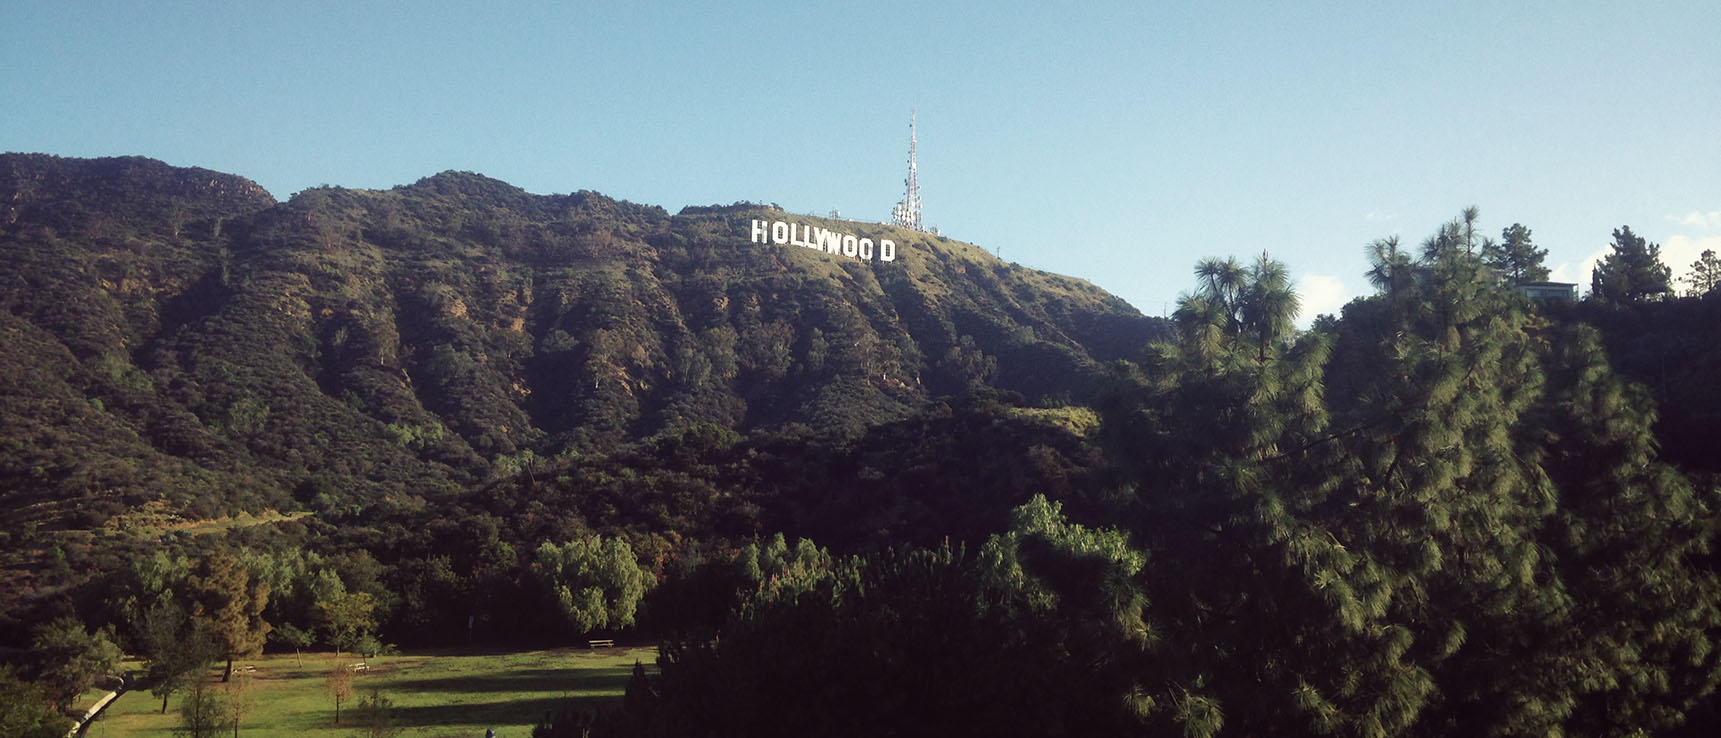 Hollywood sign hill Los Angeles California